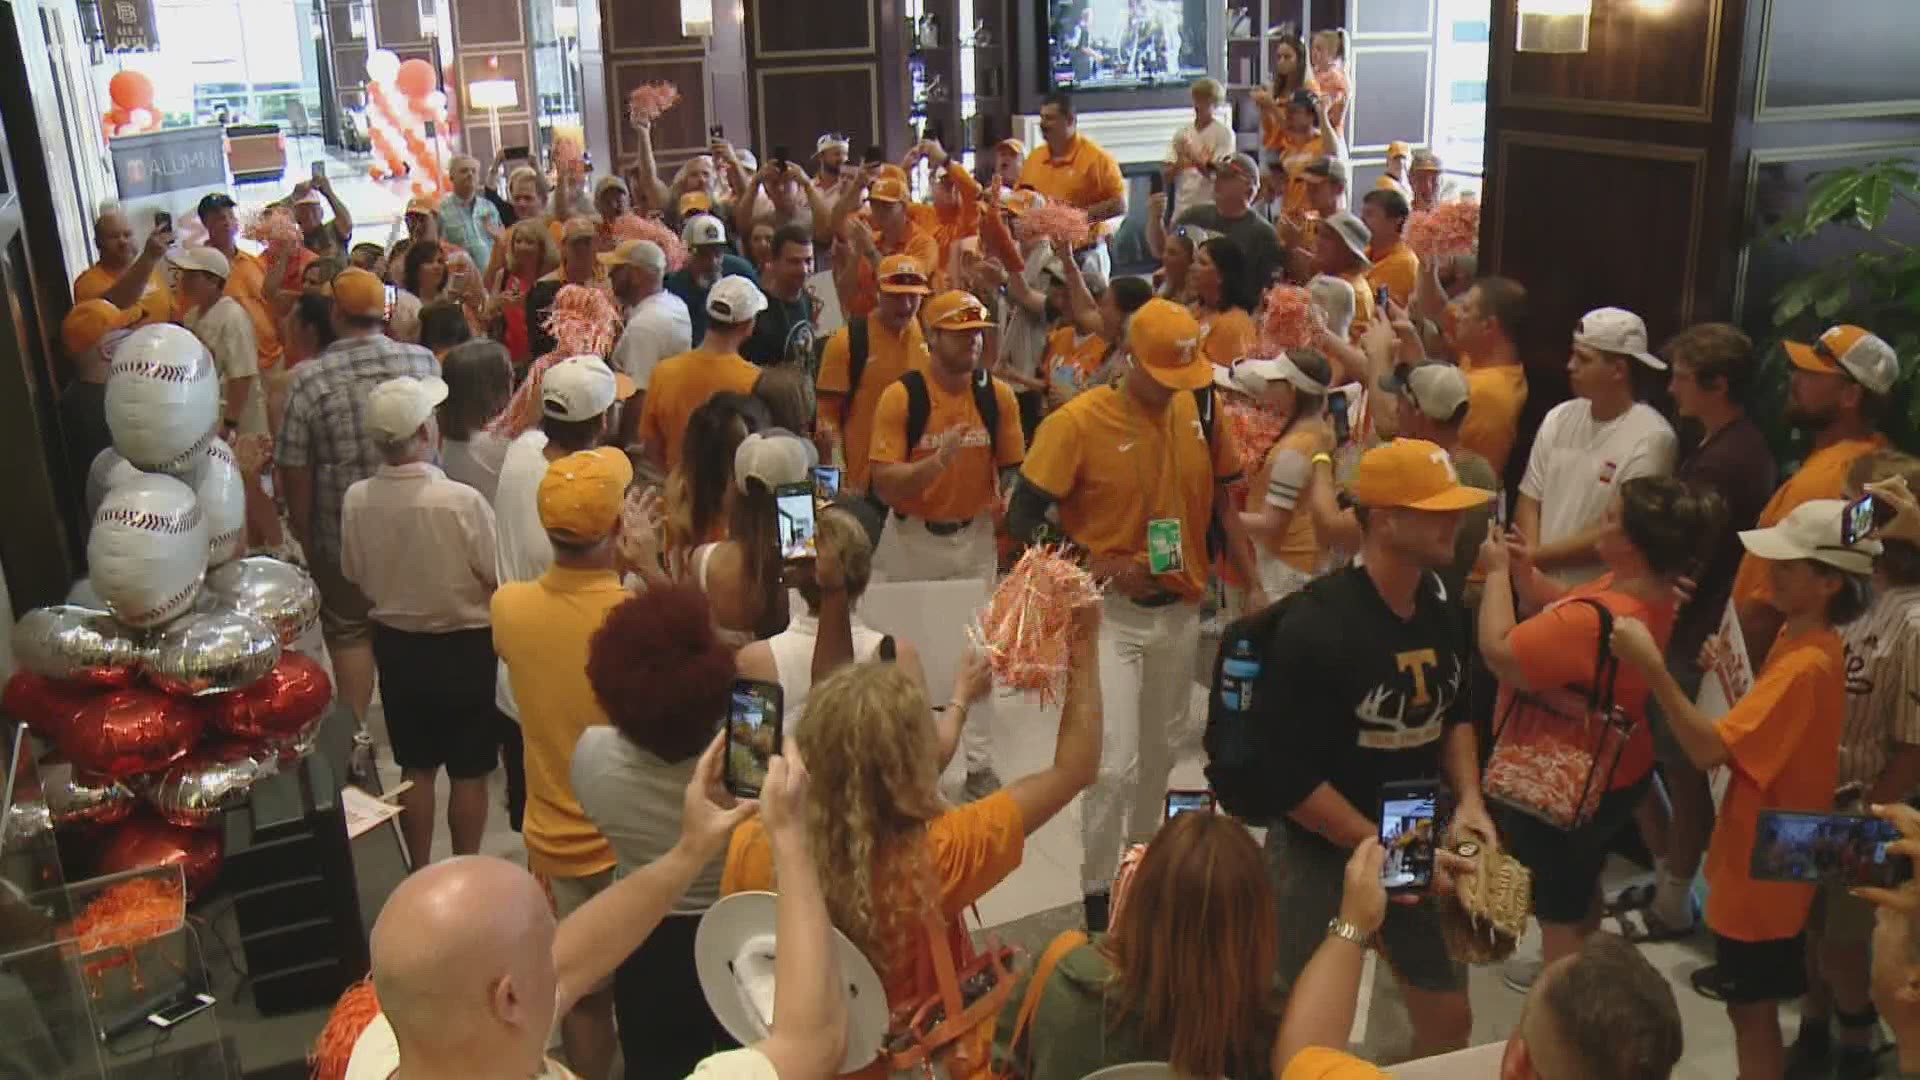 Vol fans react to loss against Virginia, look forward to next elimination game.